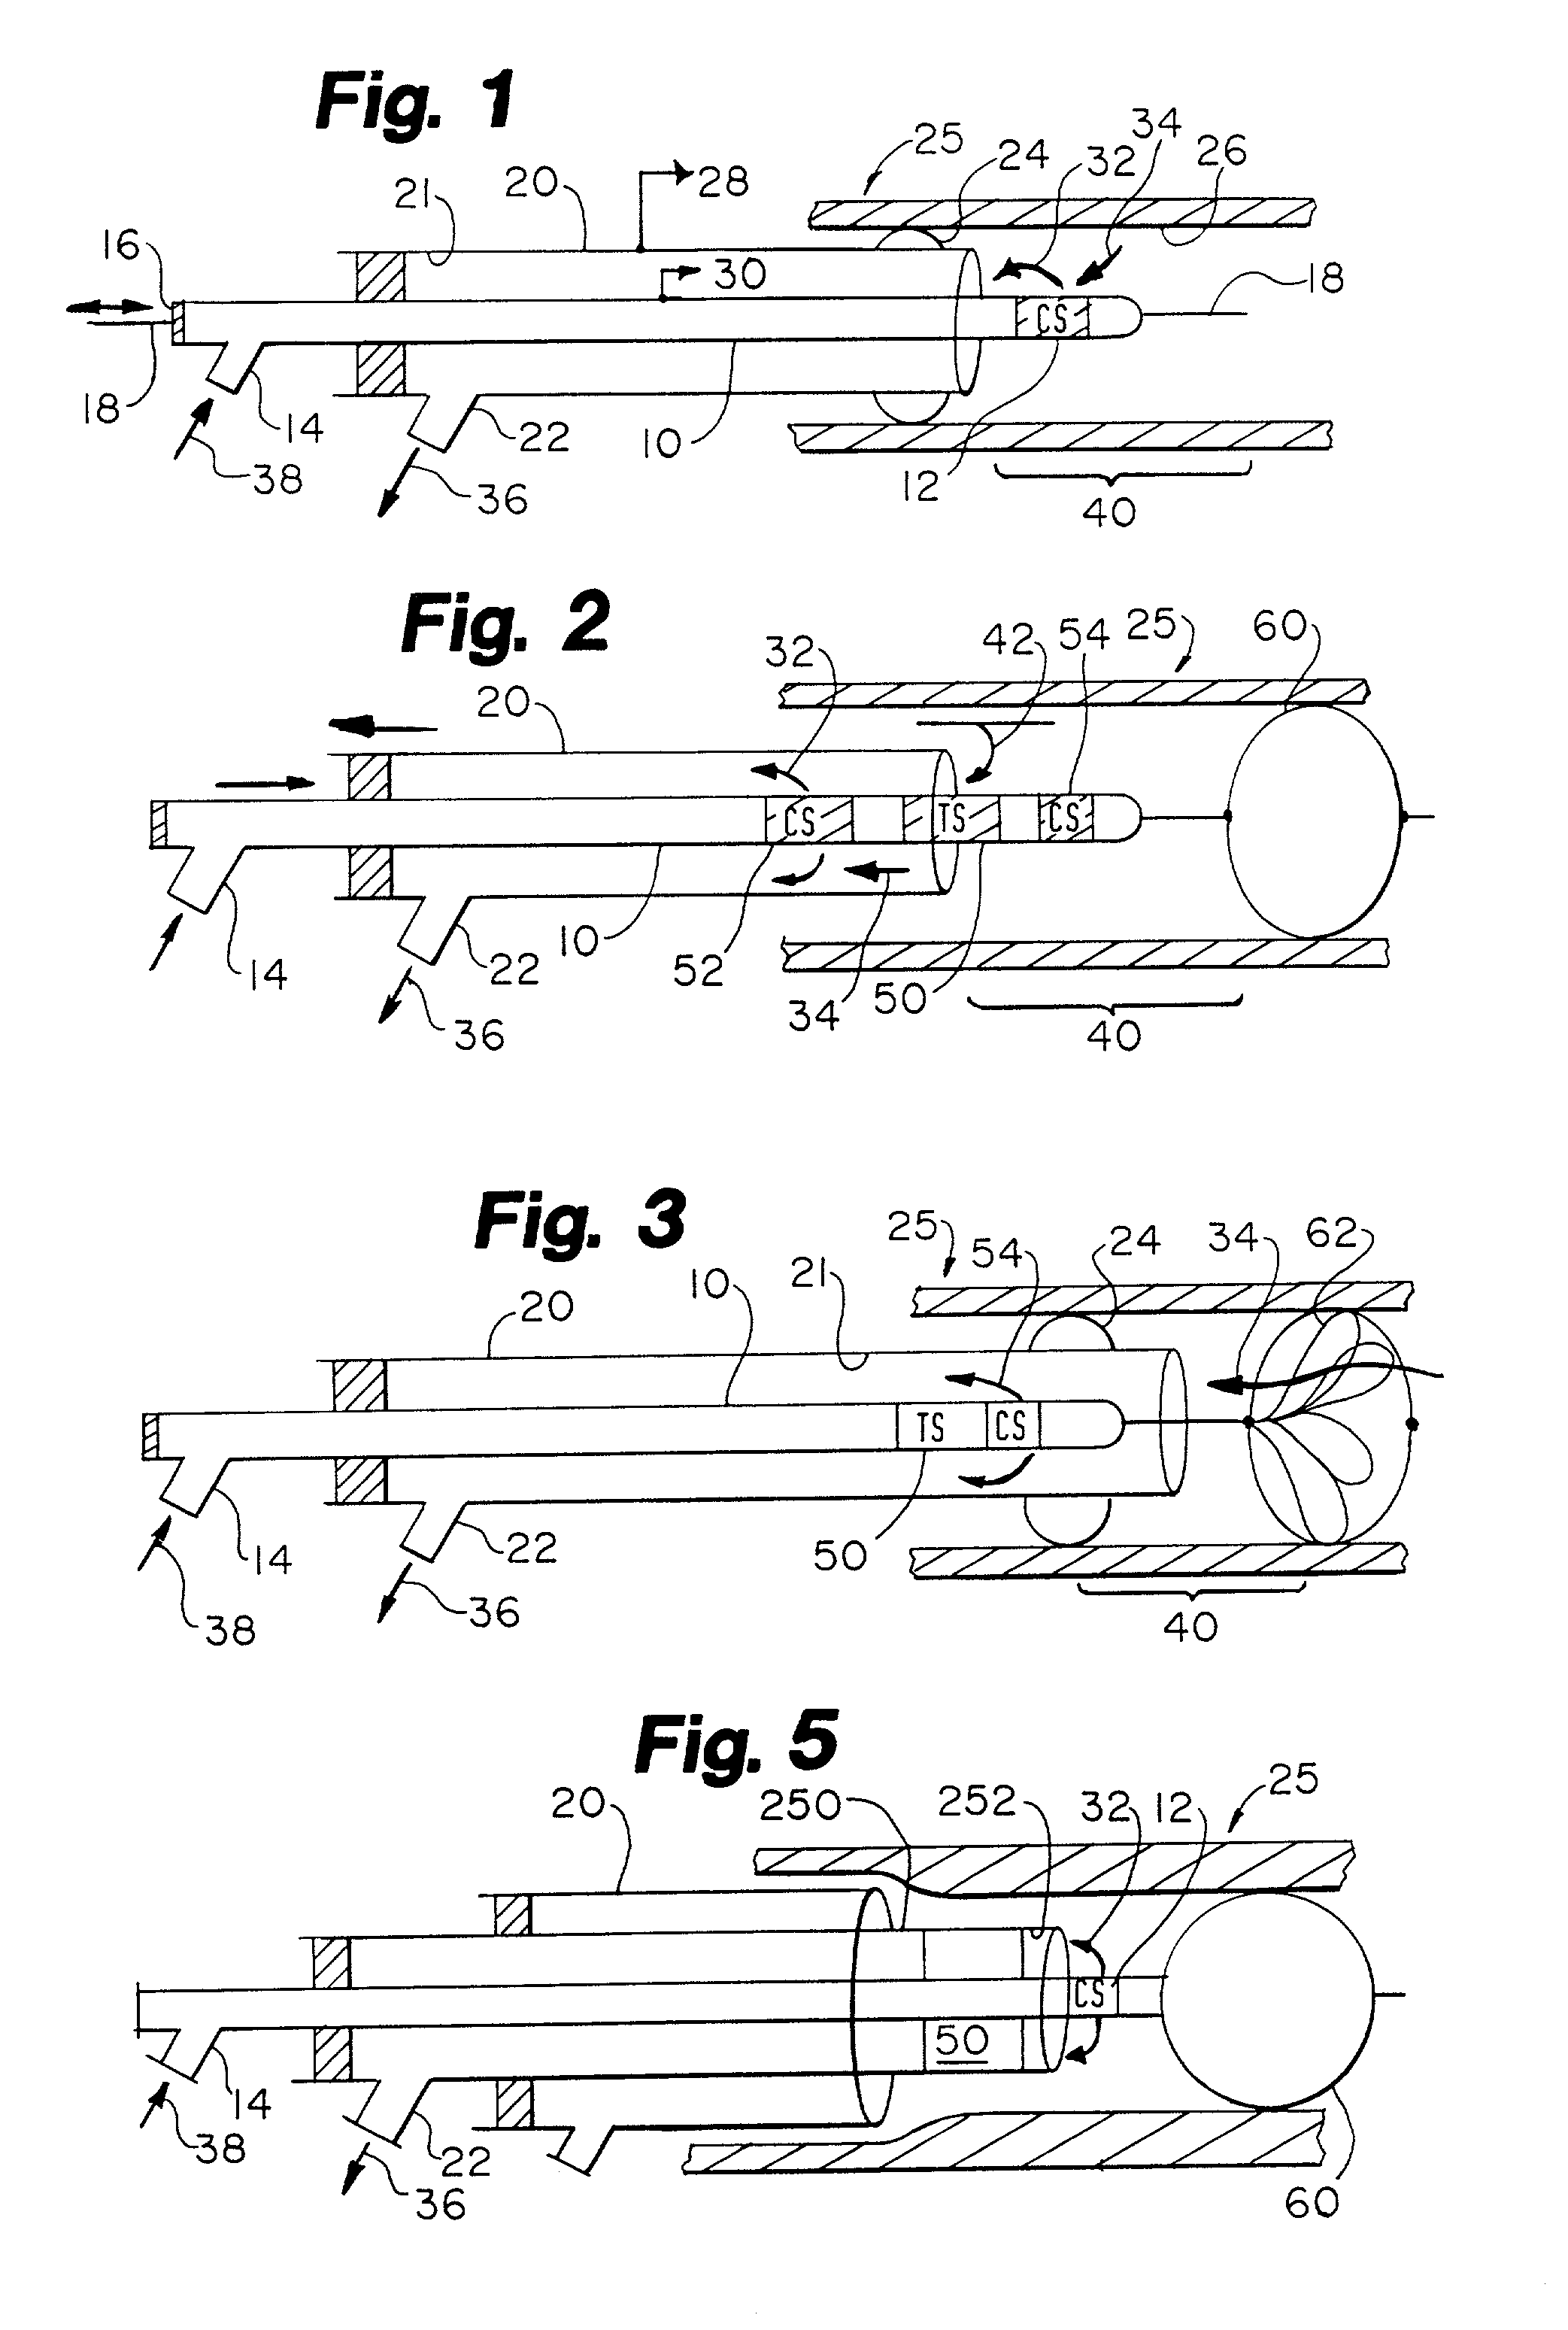 Fluidic interventional device and method of distal protection